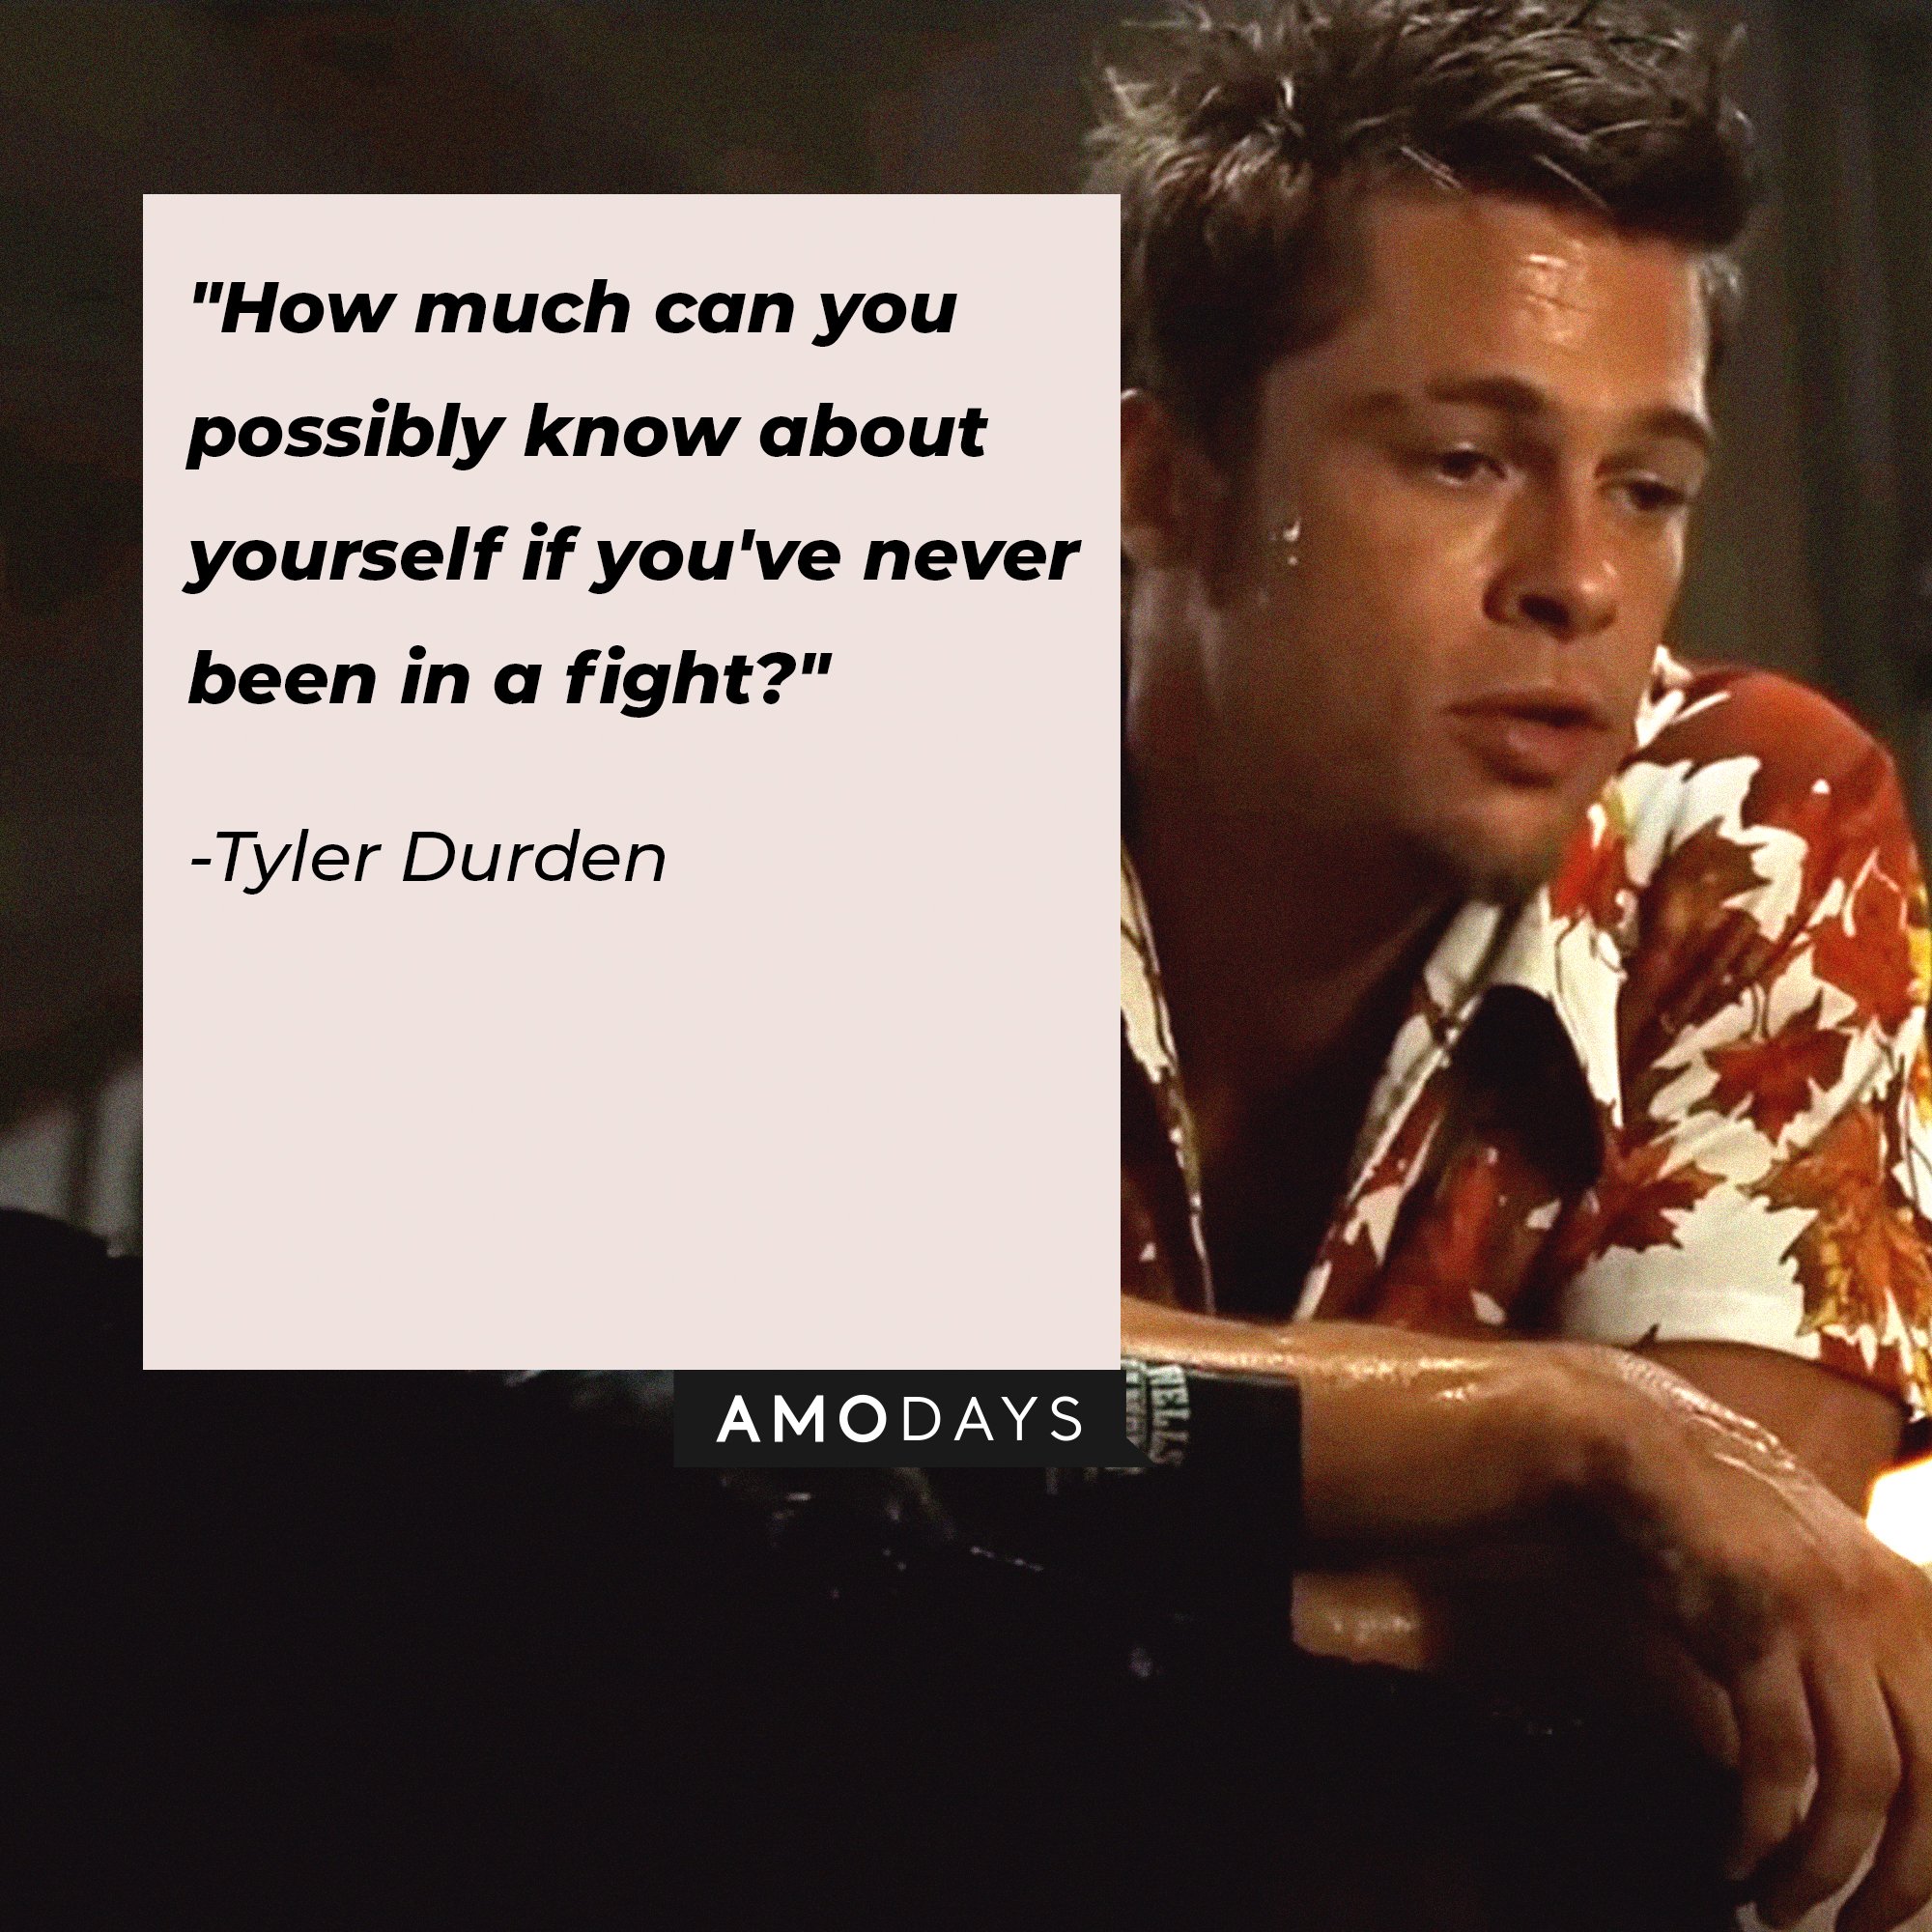 Tyler Durden's quote: "How much can you possibly know about yourself if you've never been in a fight?" | Image: AmoDays